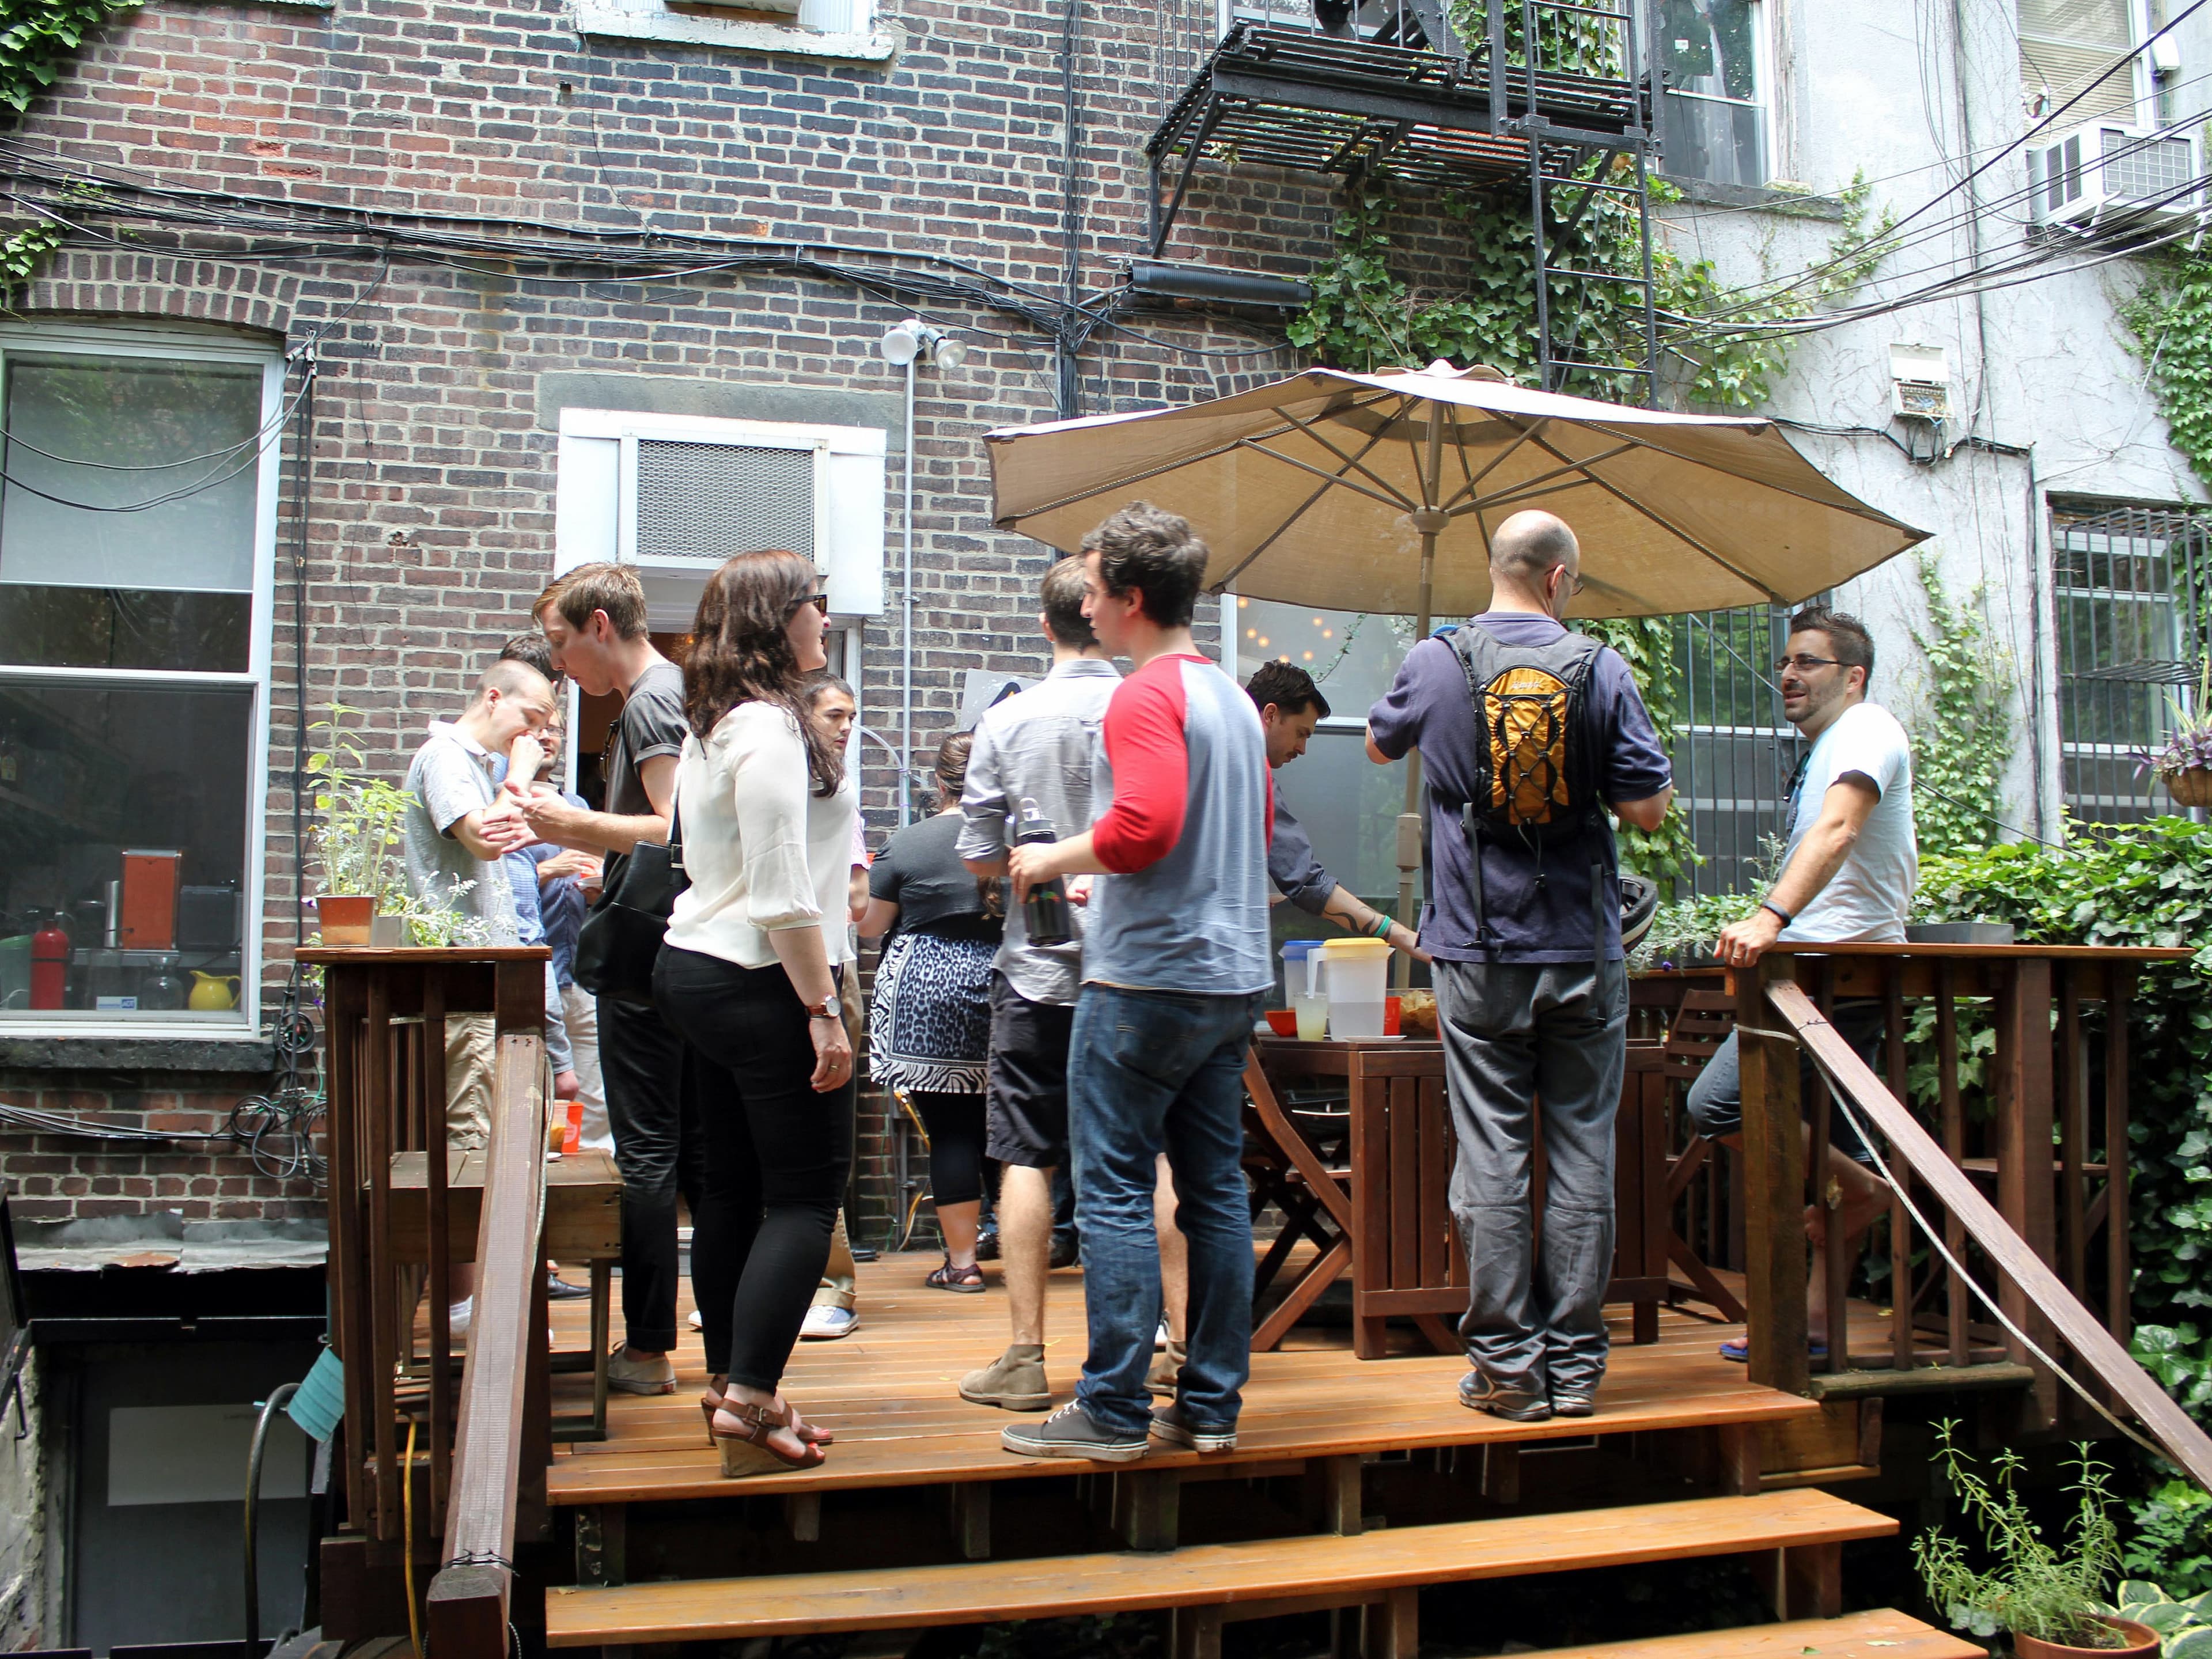 A group of people are gathered on a wooden deck in a backyard. They are socializing under a large umbrella on a sunny day. The surrounding buildings have brick and ivy-covered walls. Some people are holding drinks, and there is a table with refreshments.